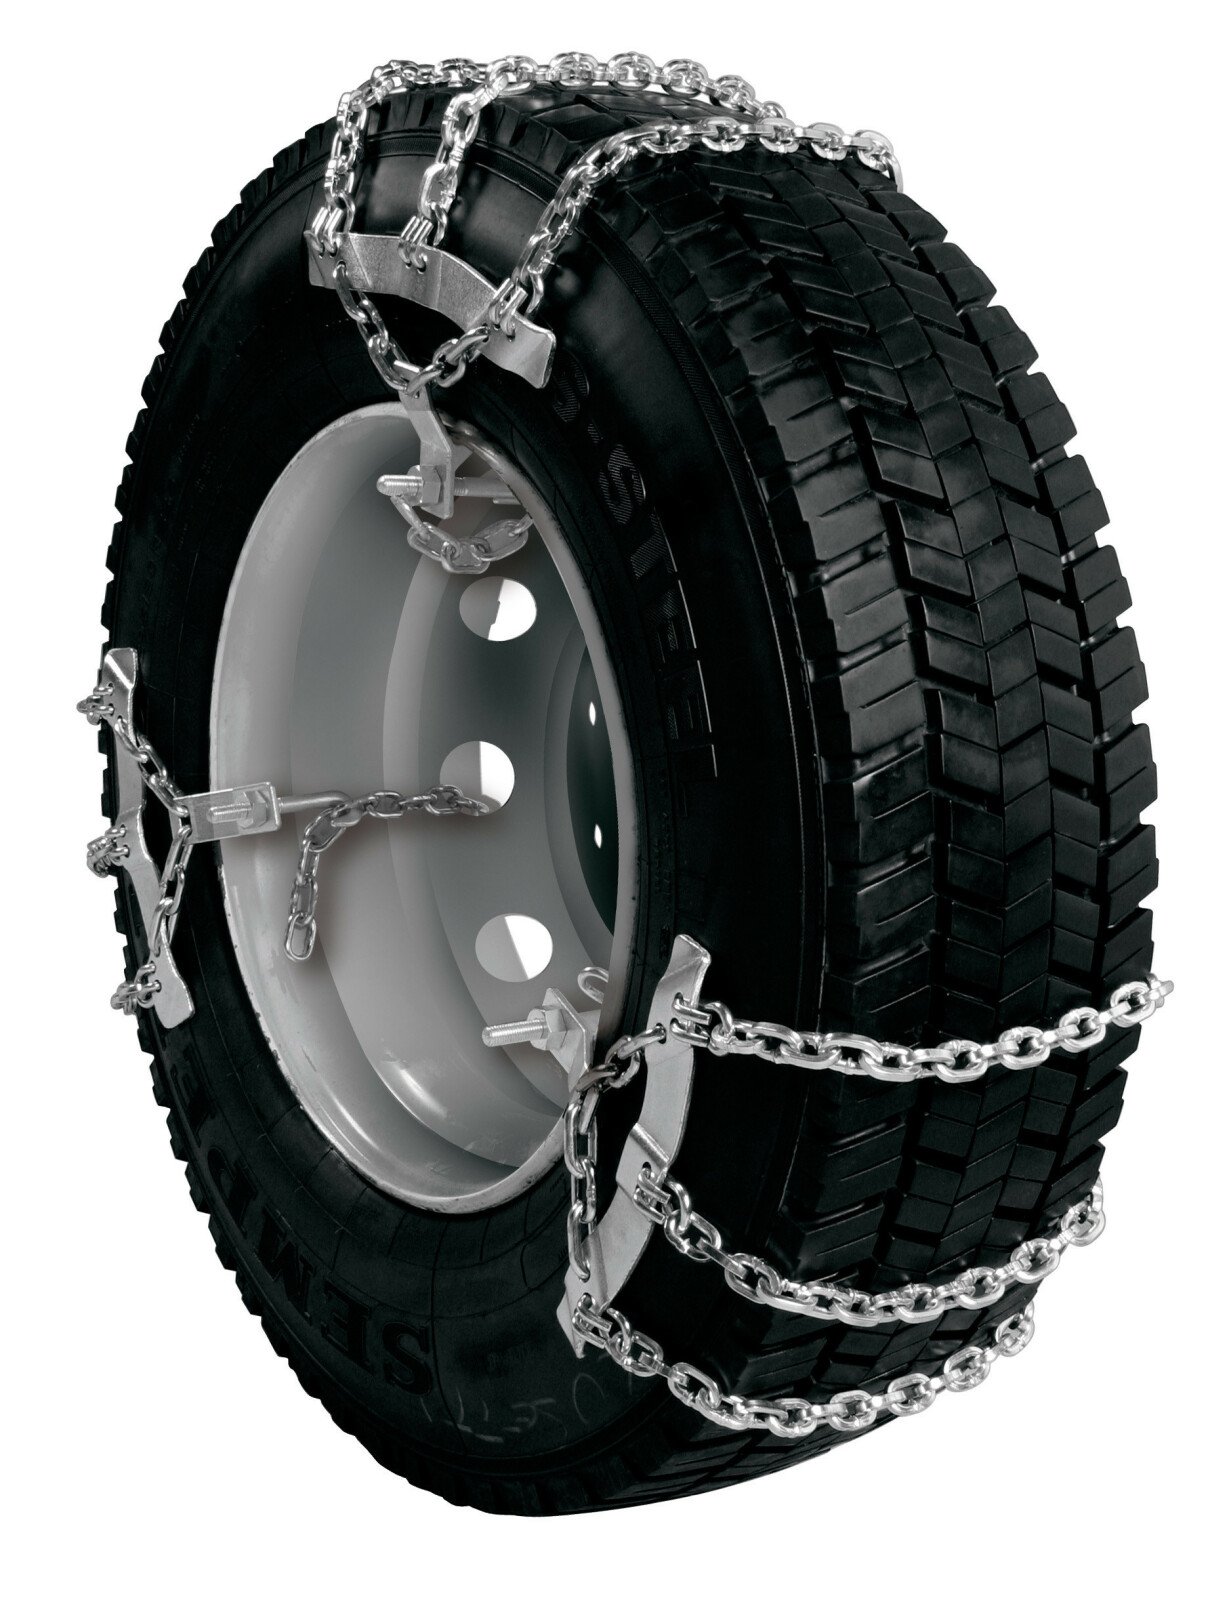 Track sector chains for trucks - M-3 thumb